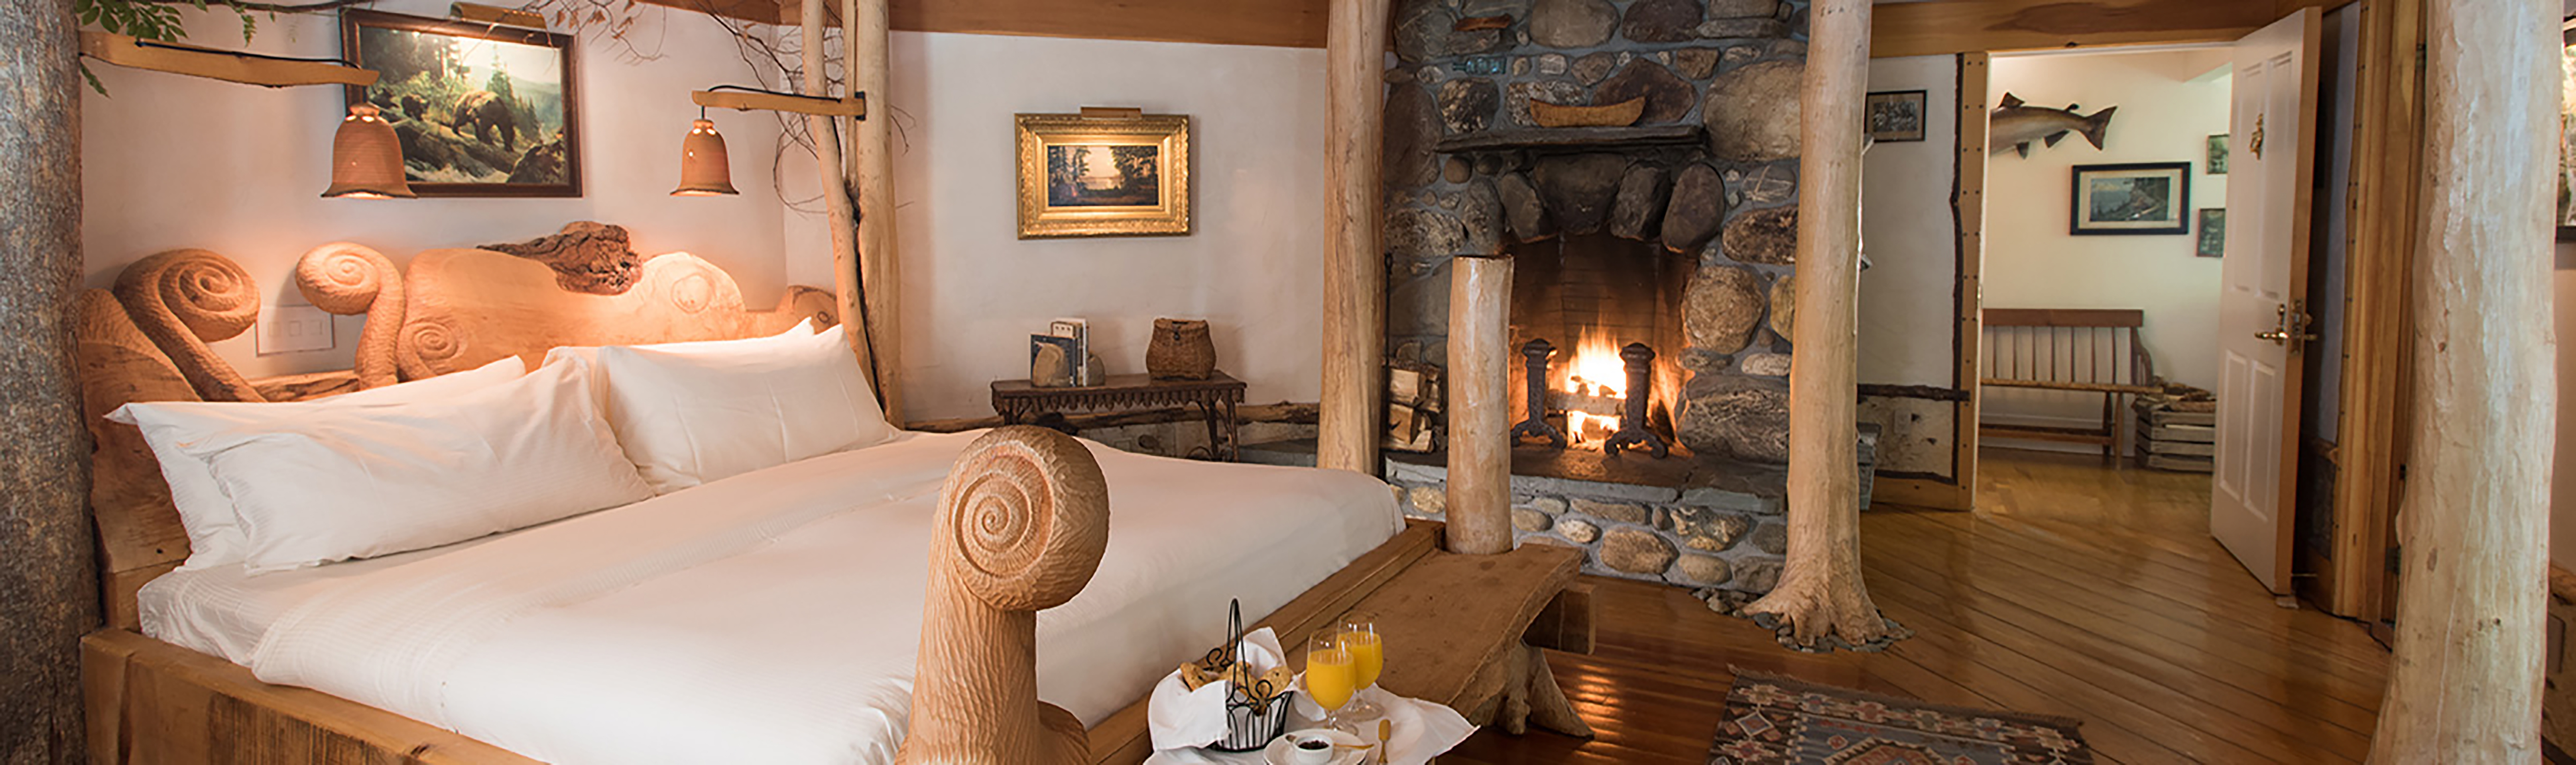 The Pitcher Inn in Vermont has working fireplaces in each of its unique themed rooms, like this one in the trout room.